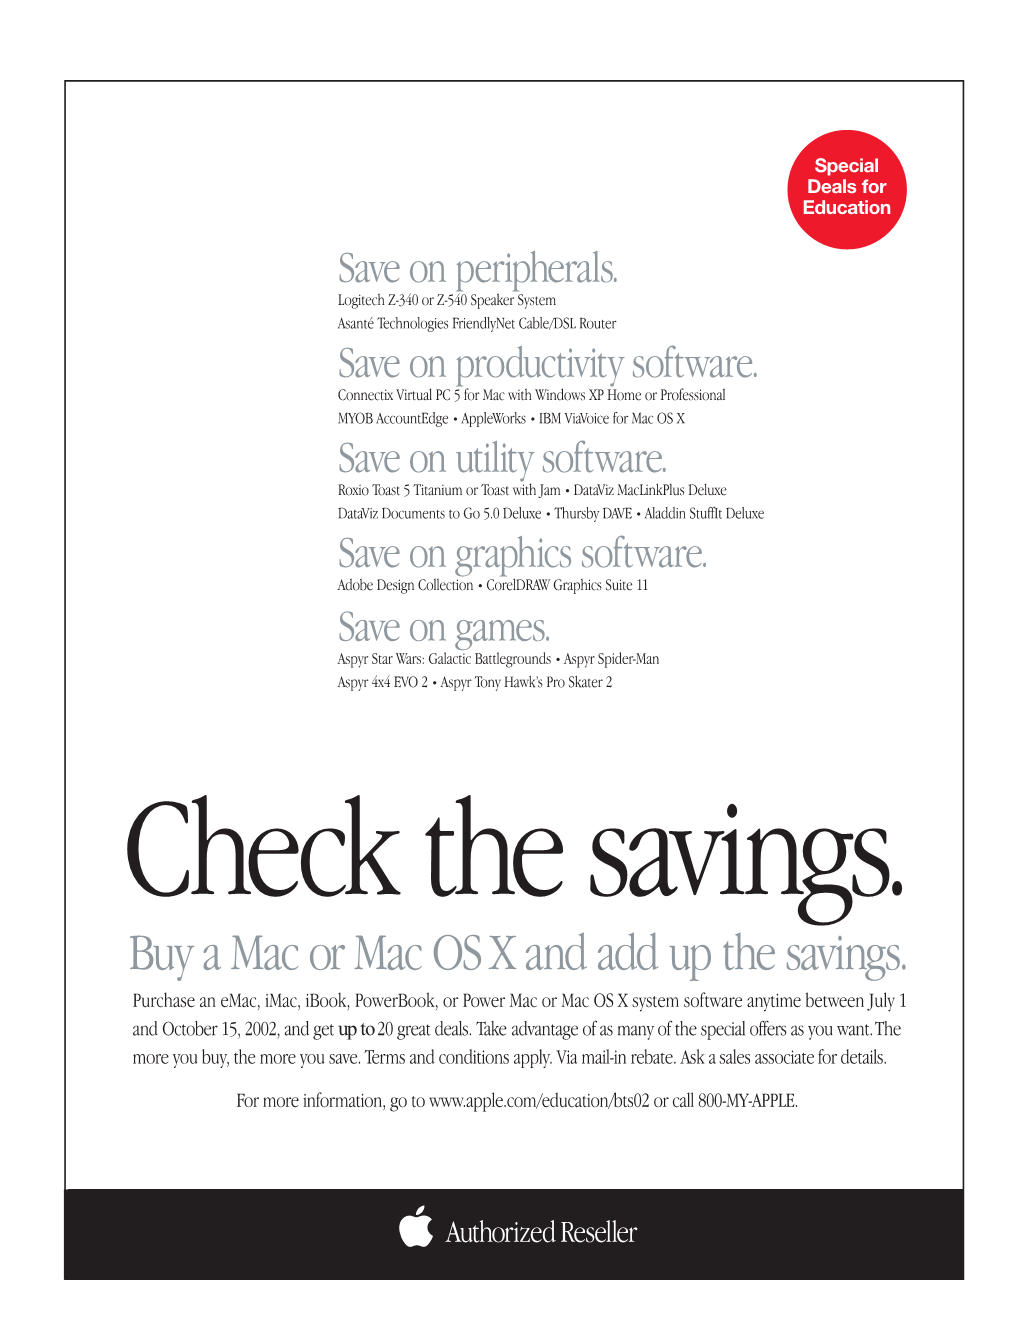 Buy a Mac Or Mac OS X and Add up the Savings